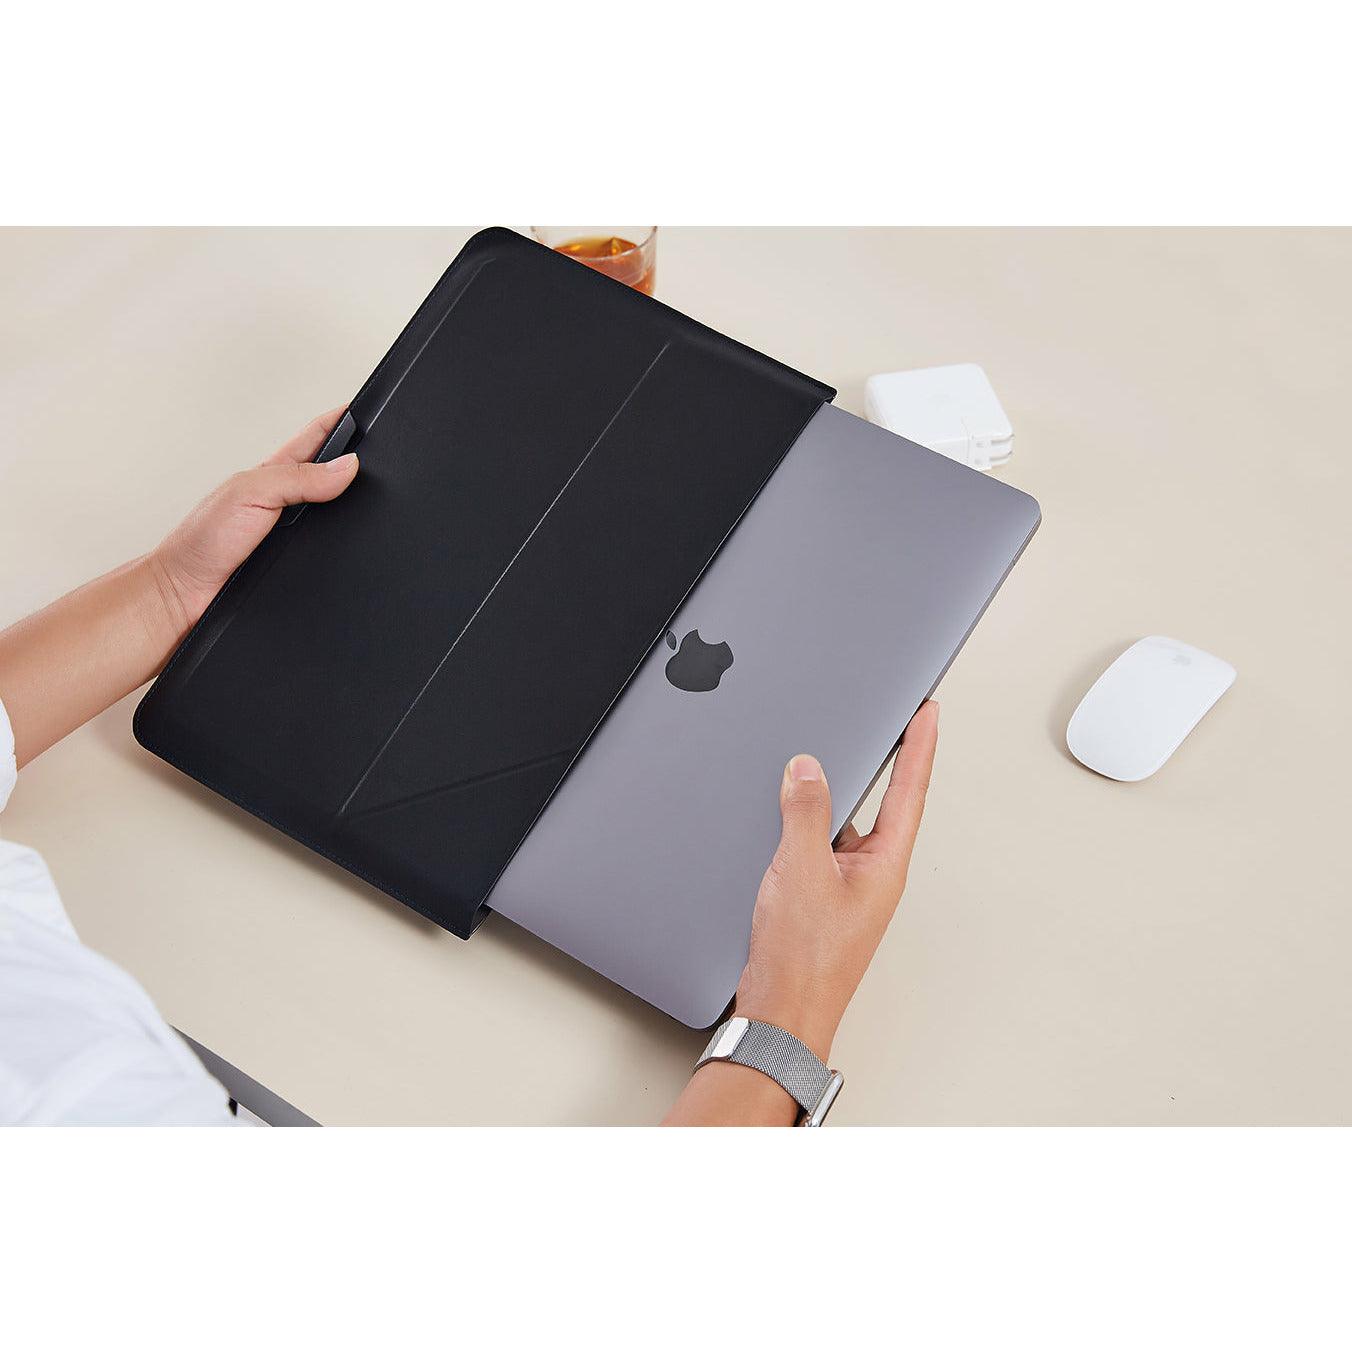 3 in 1 Carry Sleeve Invisible Laptop Stand 15 to 16 Inches with - Grab Your Gadget